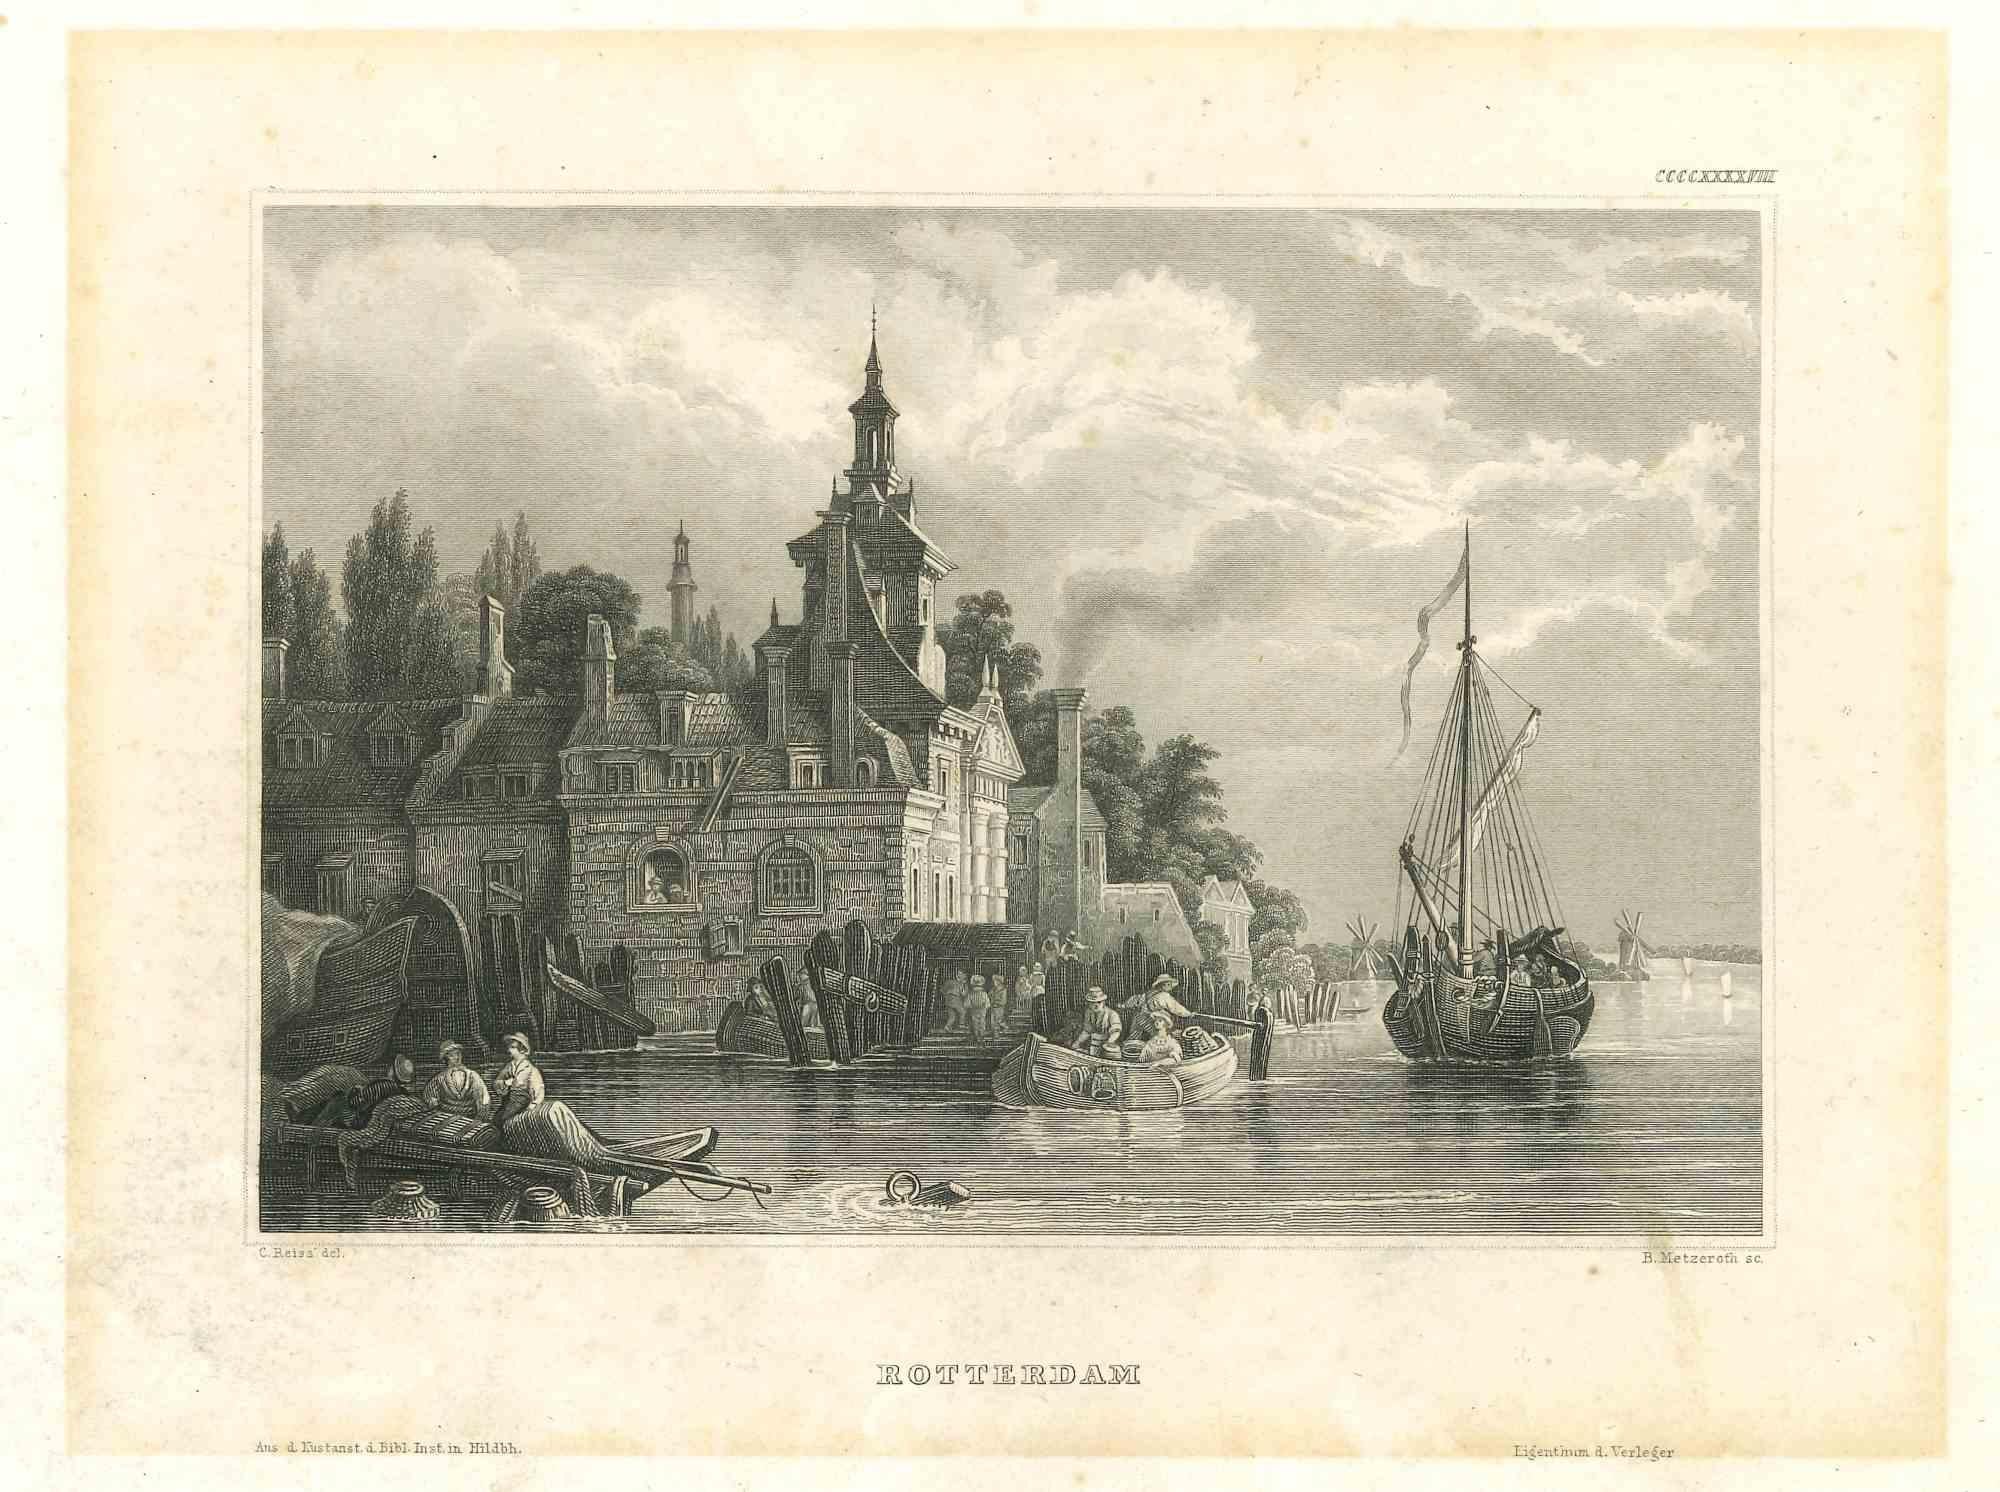 Unknown Figurative Print - Ancient View of Rotterdam - Original lithograph - 1850s